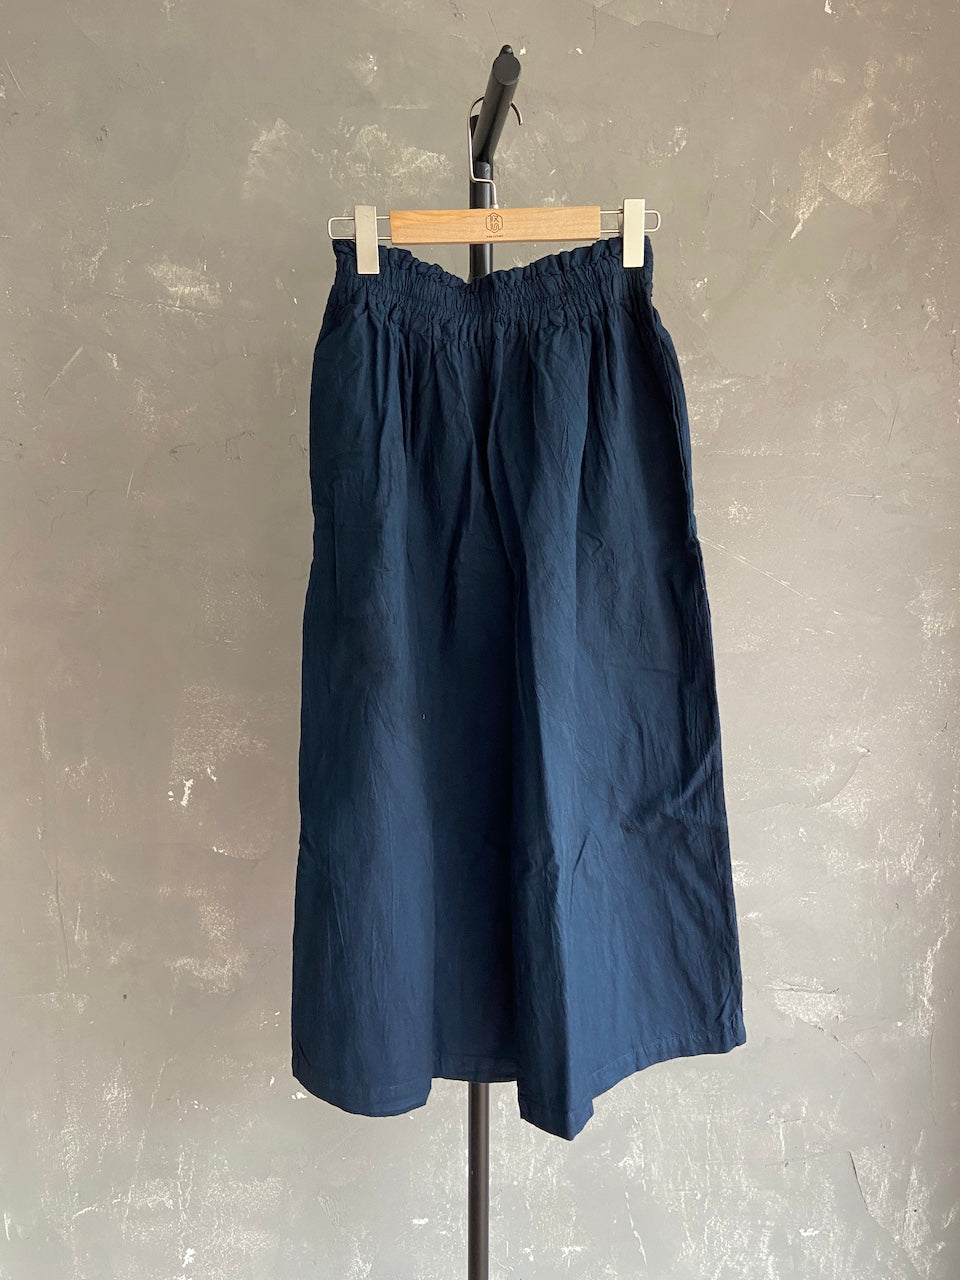 Hand Dyed Farmer's Pants in Navy Blue